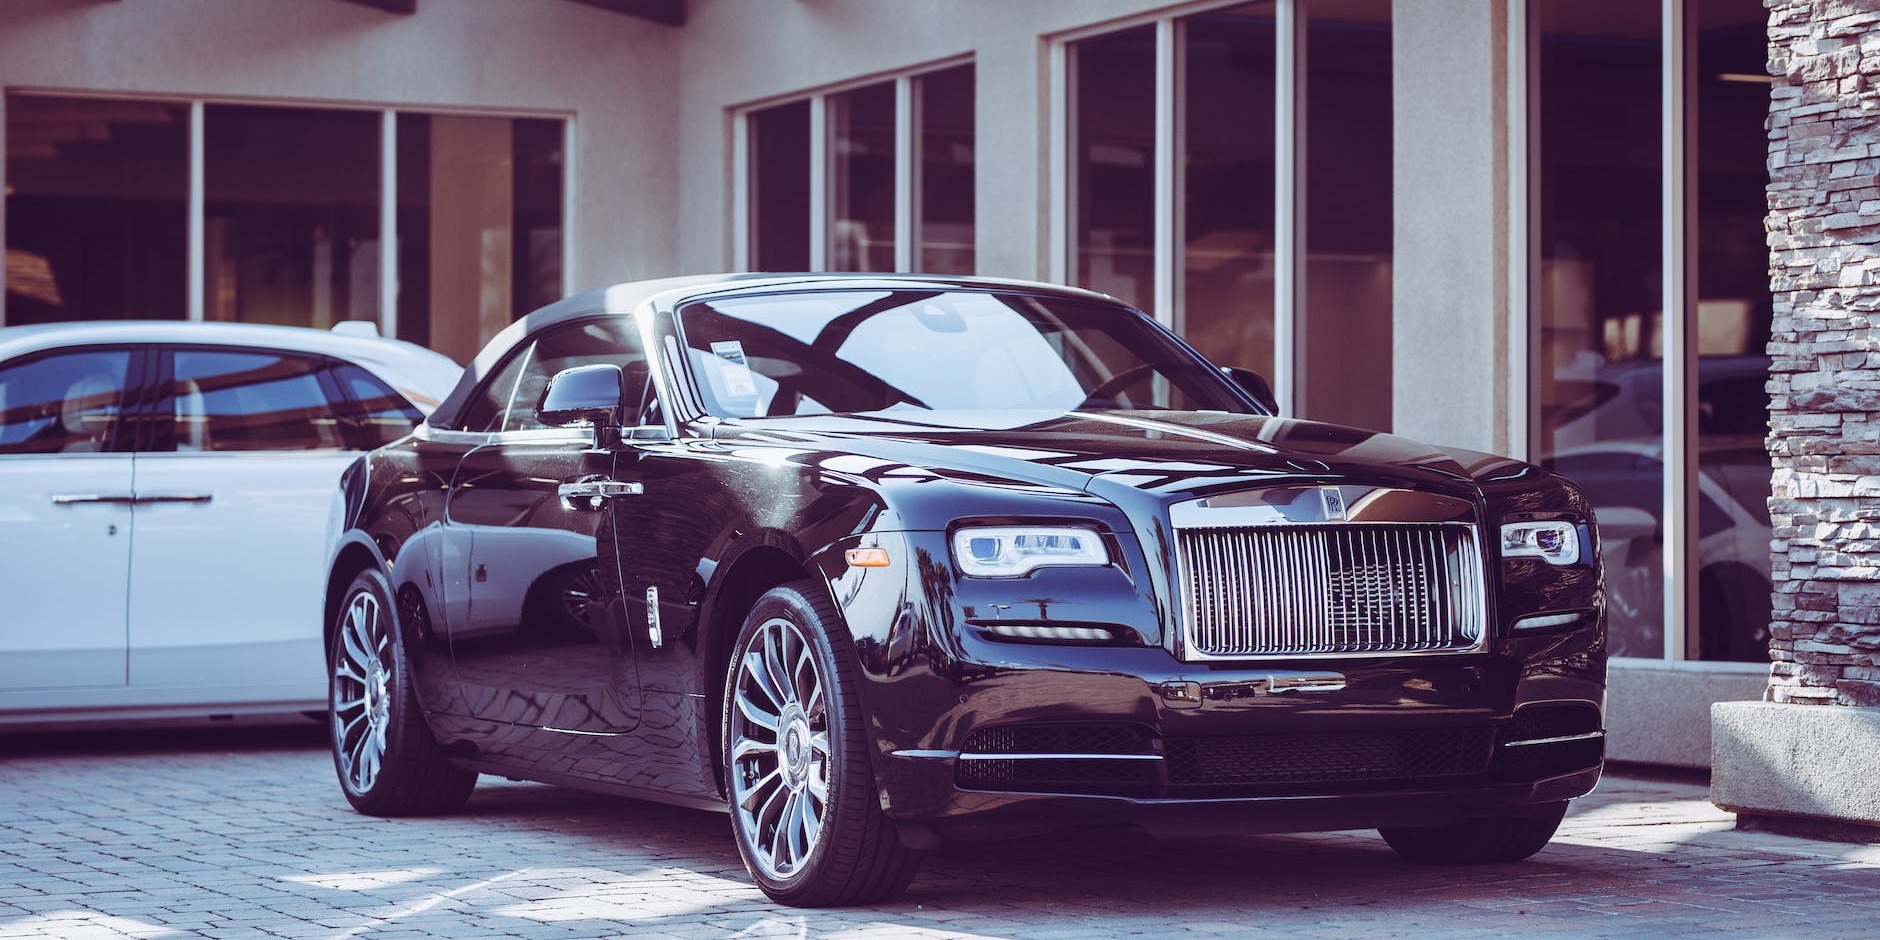 Discover the Top Features That Set the Rolls Royce Phantom Apart for Corporate Events